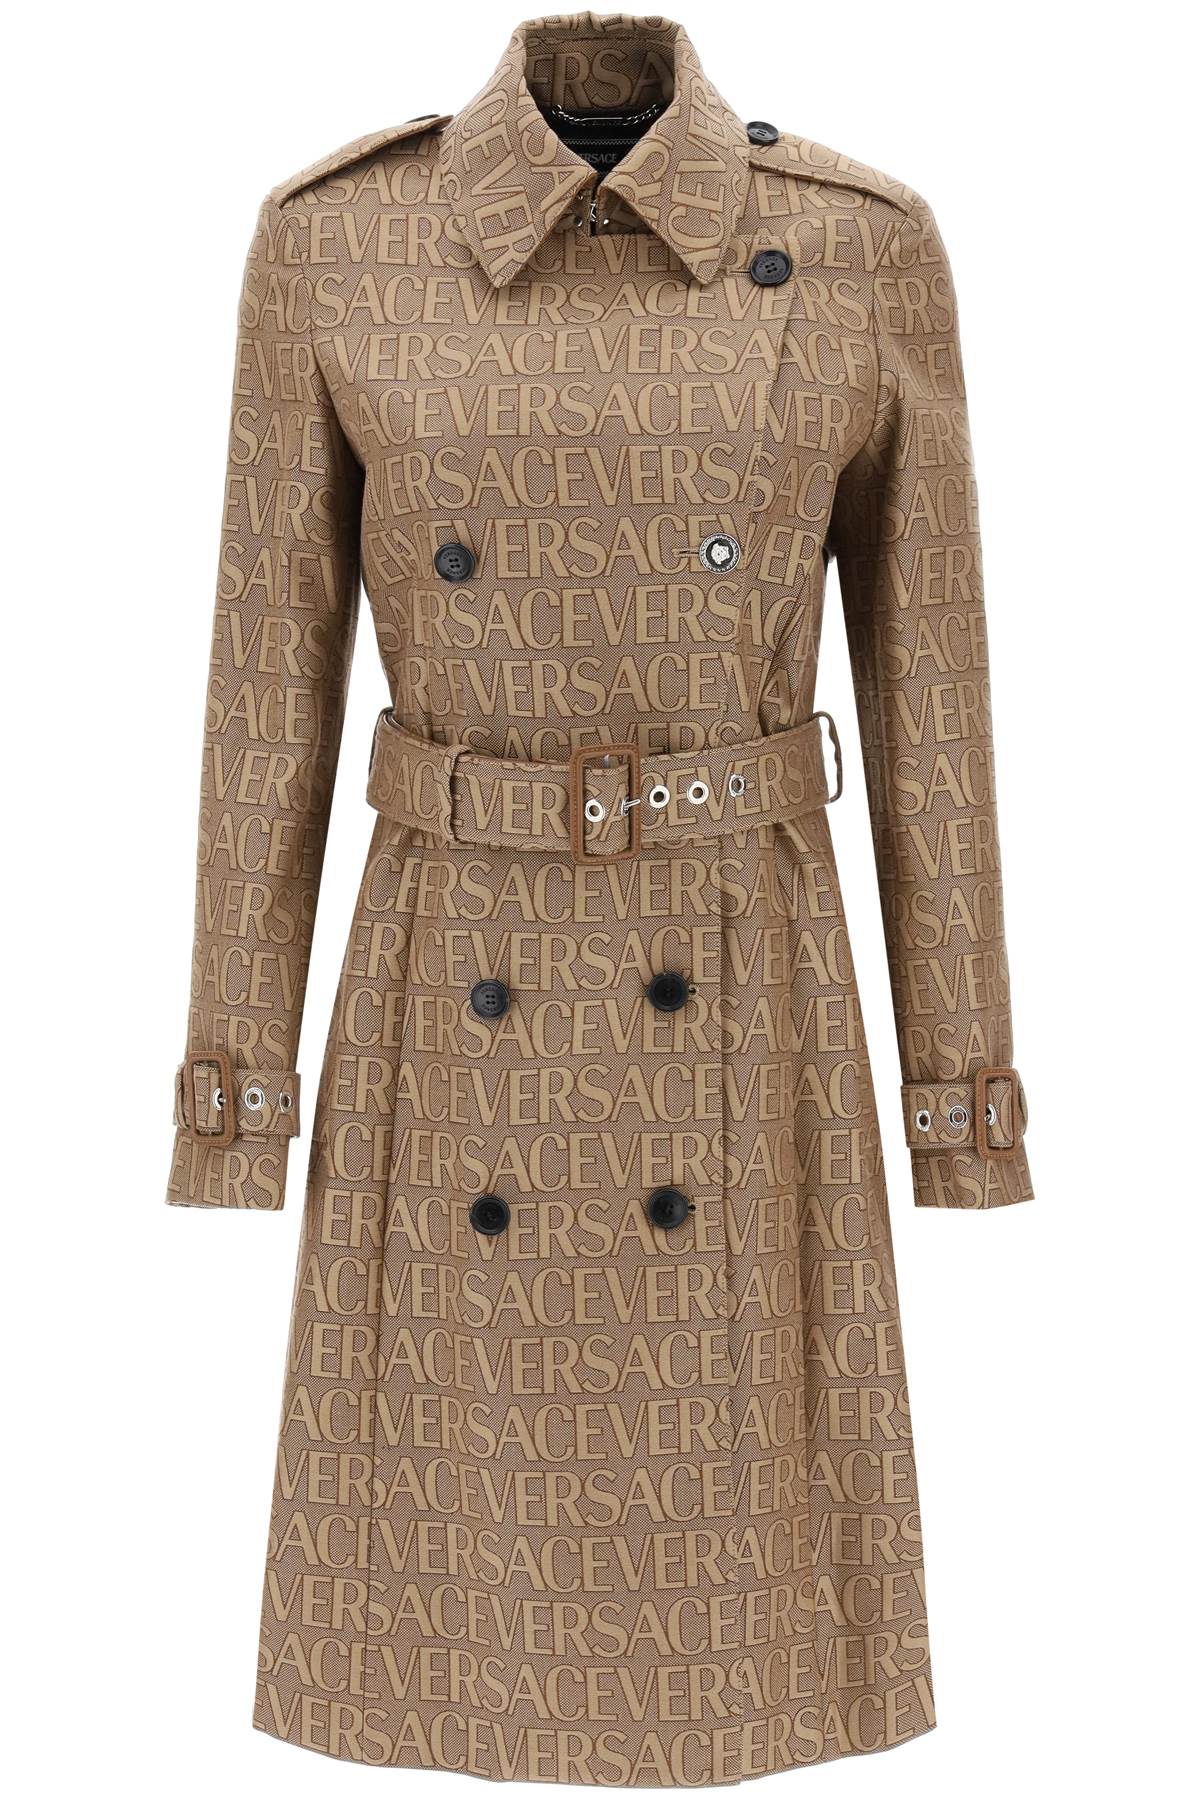 Versace 'versace allover' double-breasted trench coat 1011499 1A03315 BROWN BEIGE